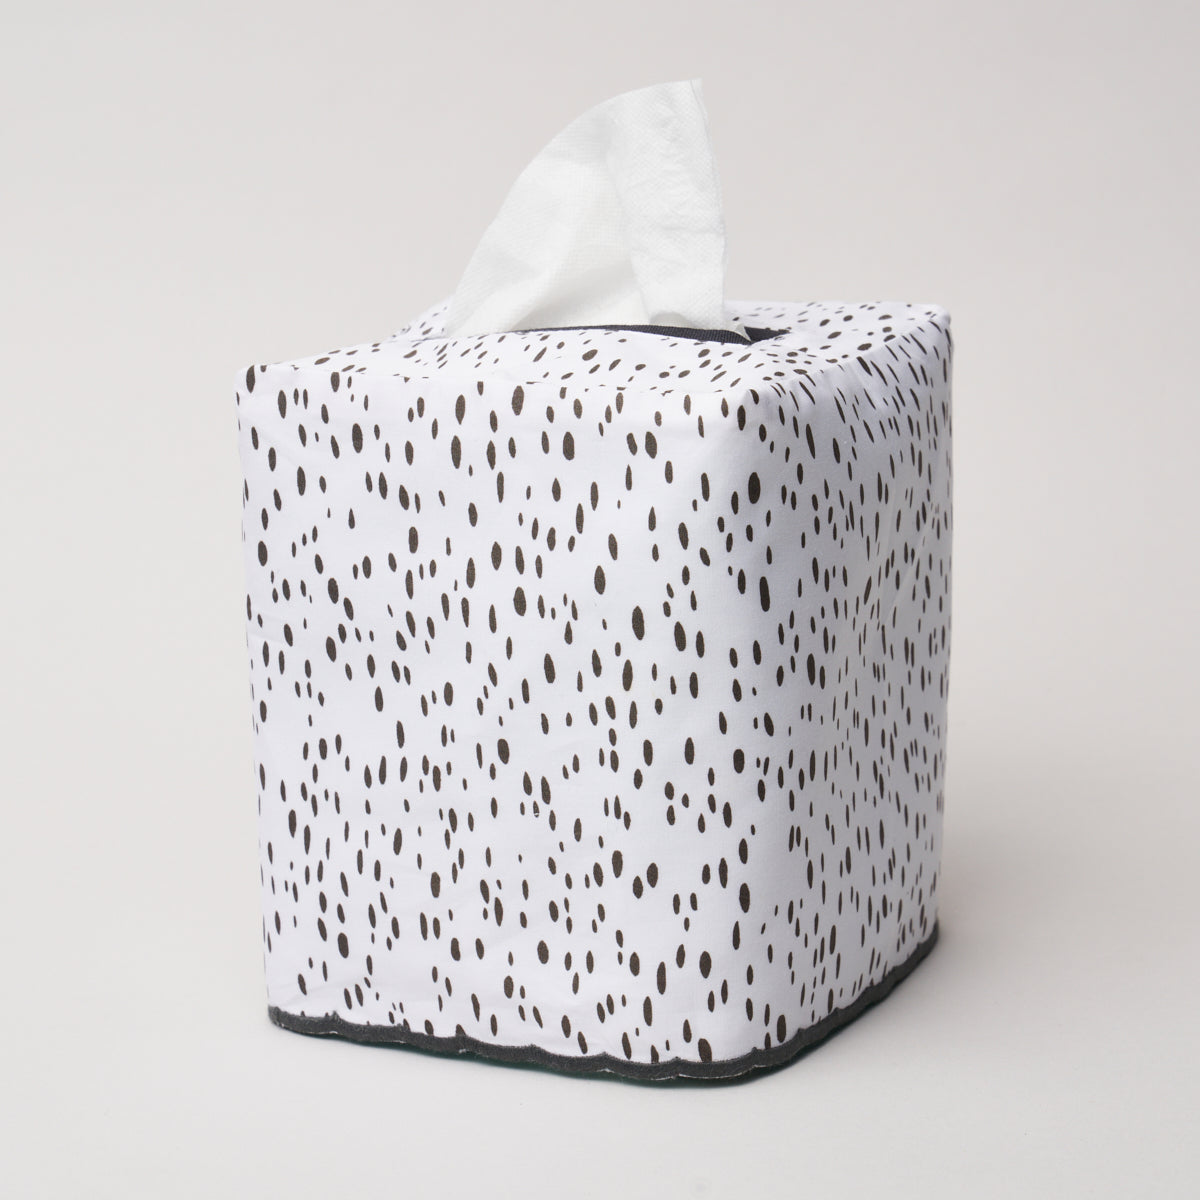 Celine Tissue Box Cover (Charcoal)